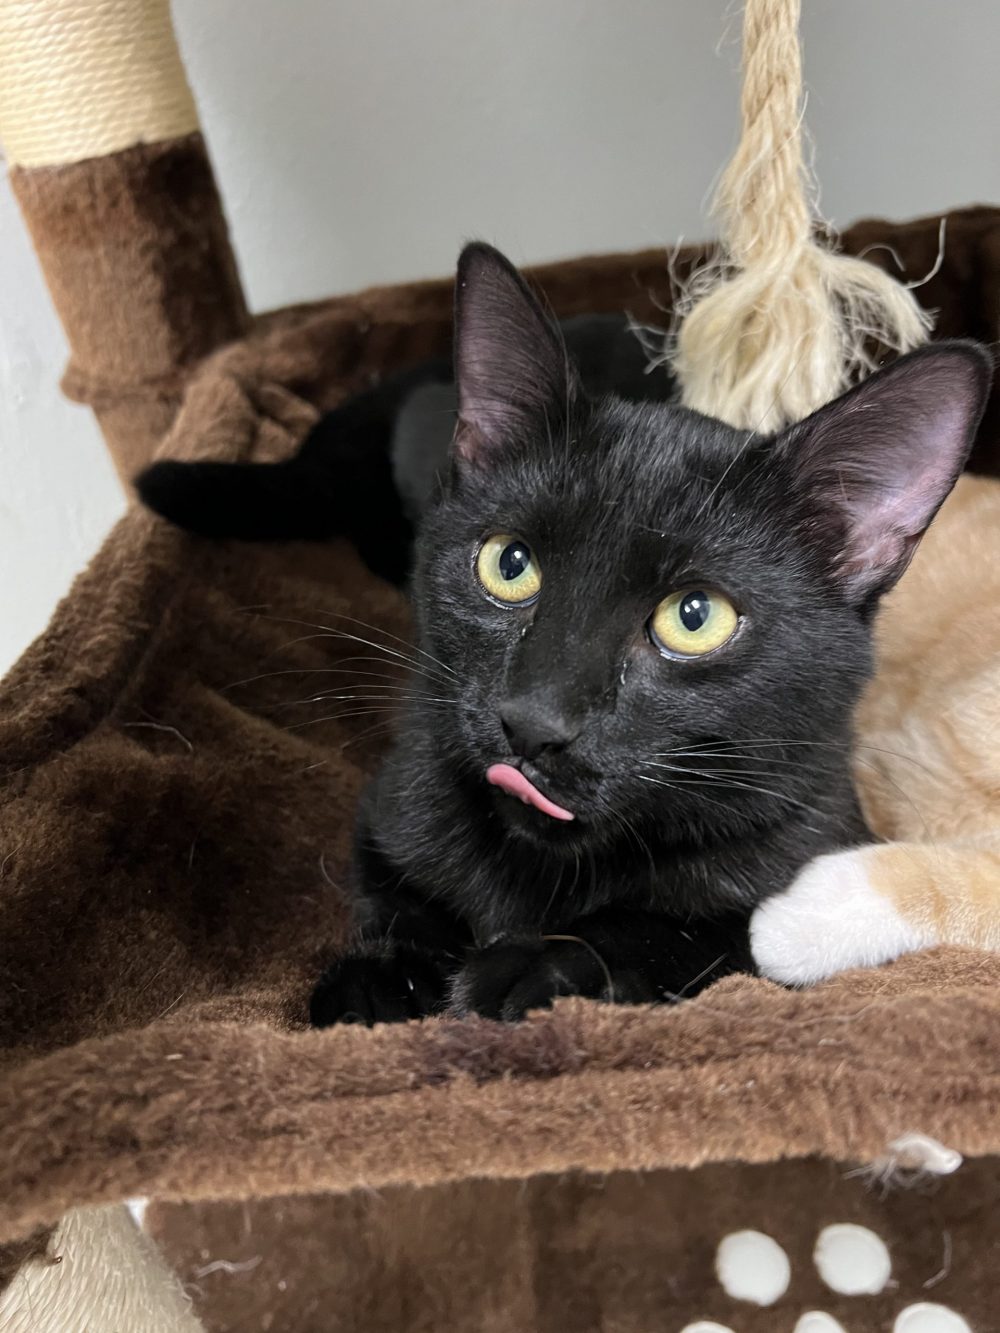 Meet Phoenix! Phoenix loves exploring, he loves seeing new things! He is super playful and likes a good pet! He loves wrestling with his brother or just peacefully napping in his bed! This baby is available for adoption, come meet this cutie!